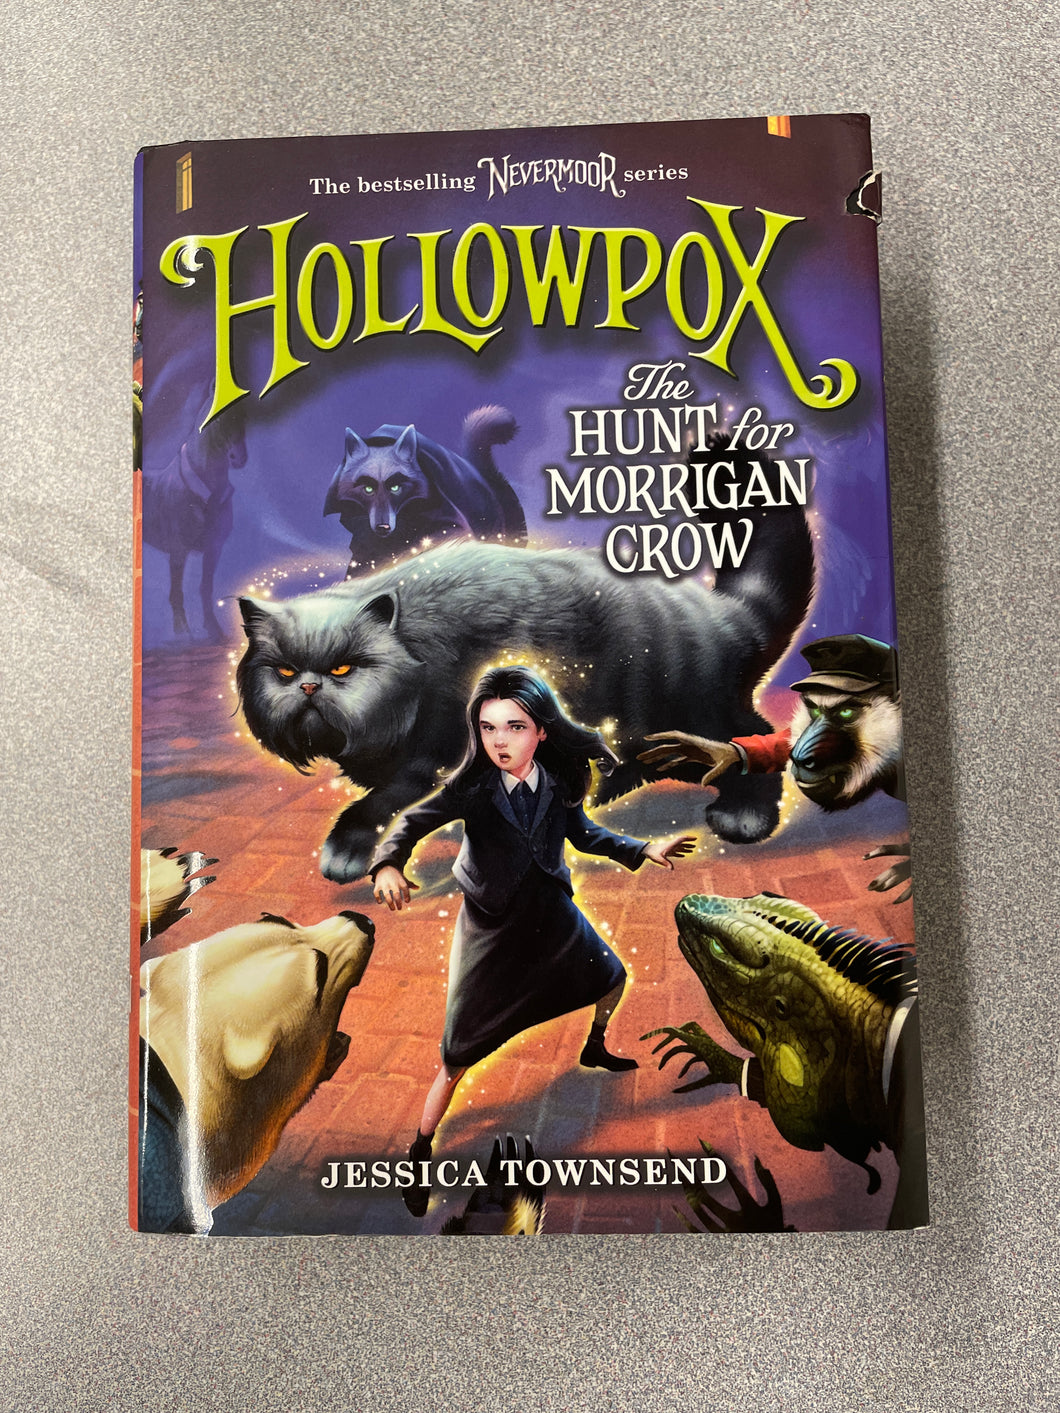 Townsend, Jessica, Hollowpox: The Hunt for Morrigan Crow [2020] YF 10/23